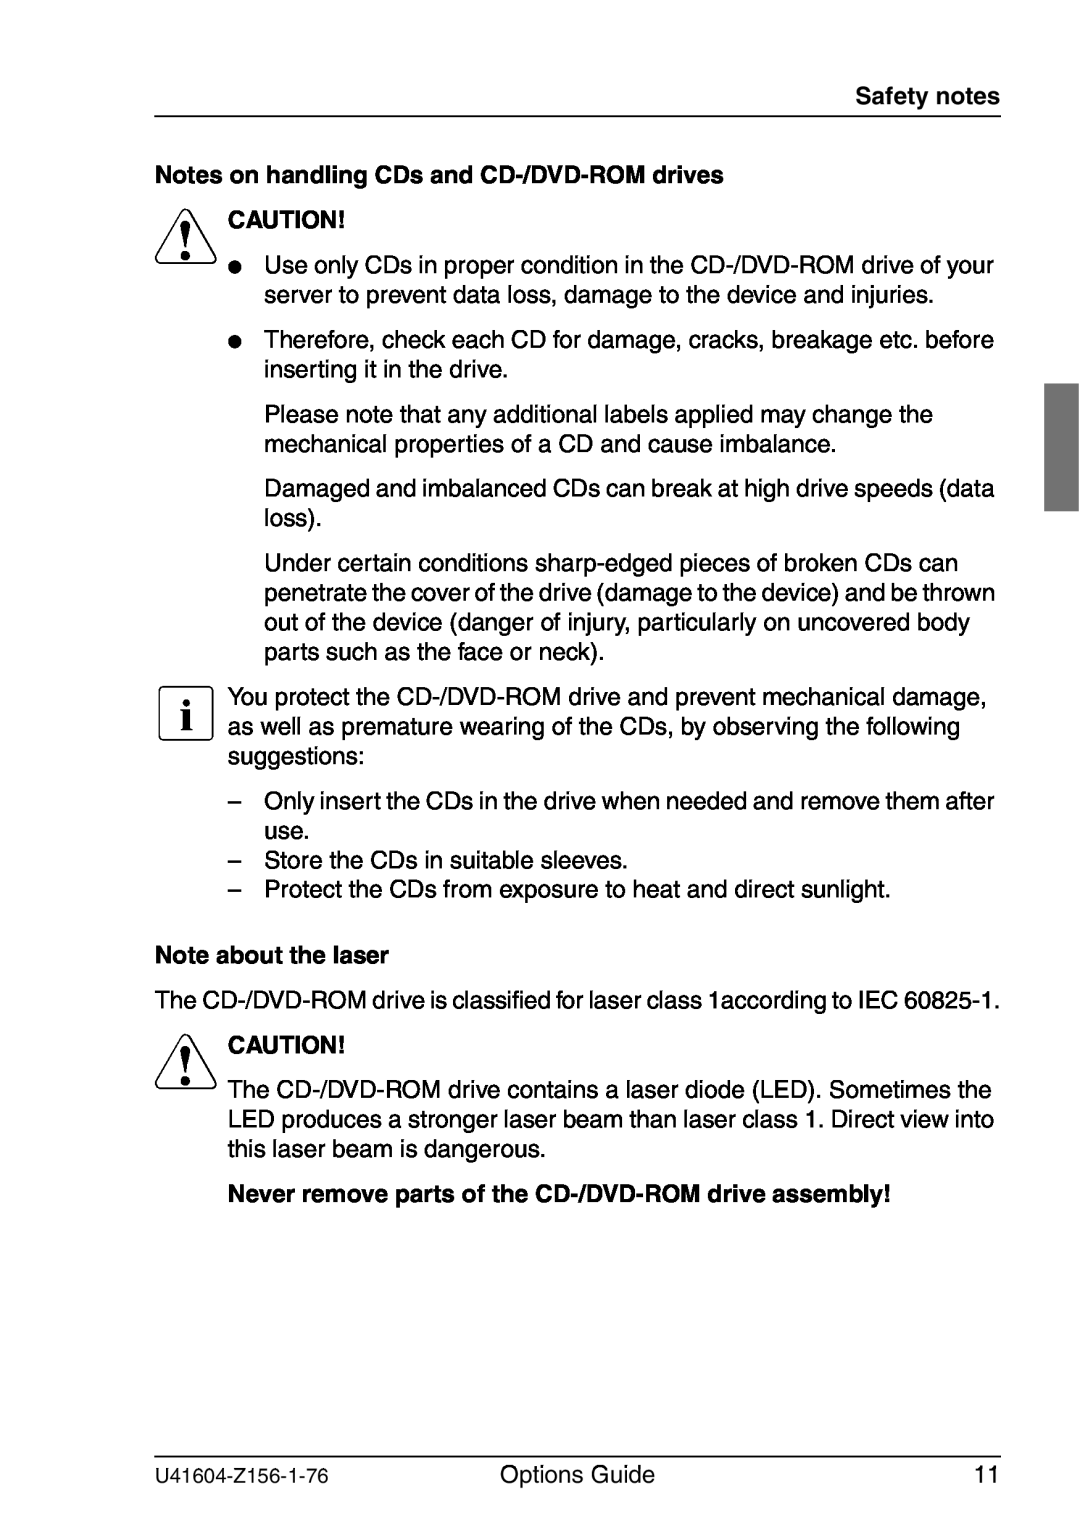 Fujitsu TX150 S3 Safety notes Notes on handling CDs and CD-/DVD-ROM drives V CAUTION, Note about the laser, V Caution 